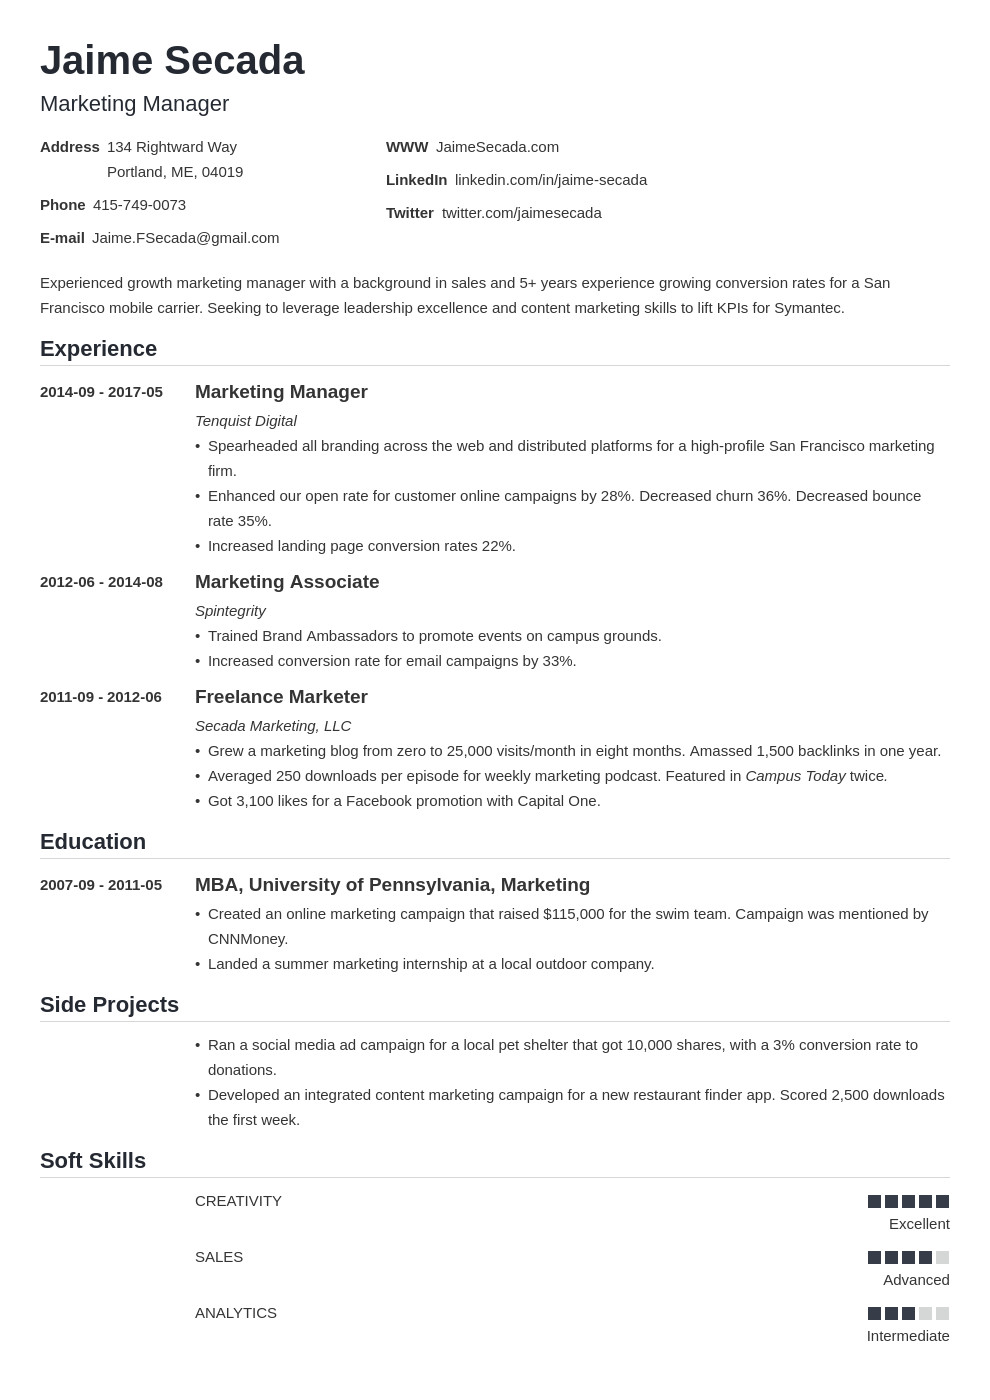 Free Resume Samples for Sales and Marketing Sales and Marketing Resume Template